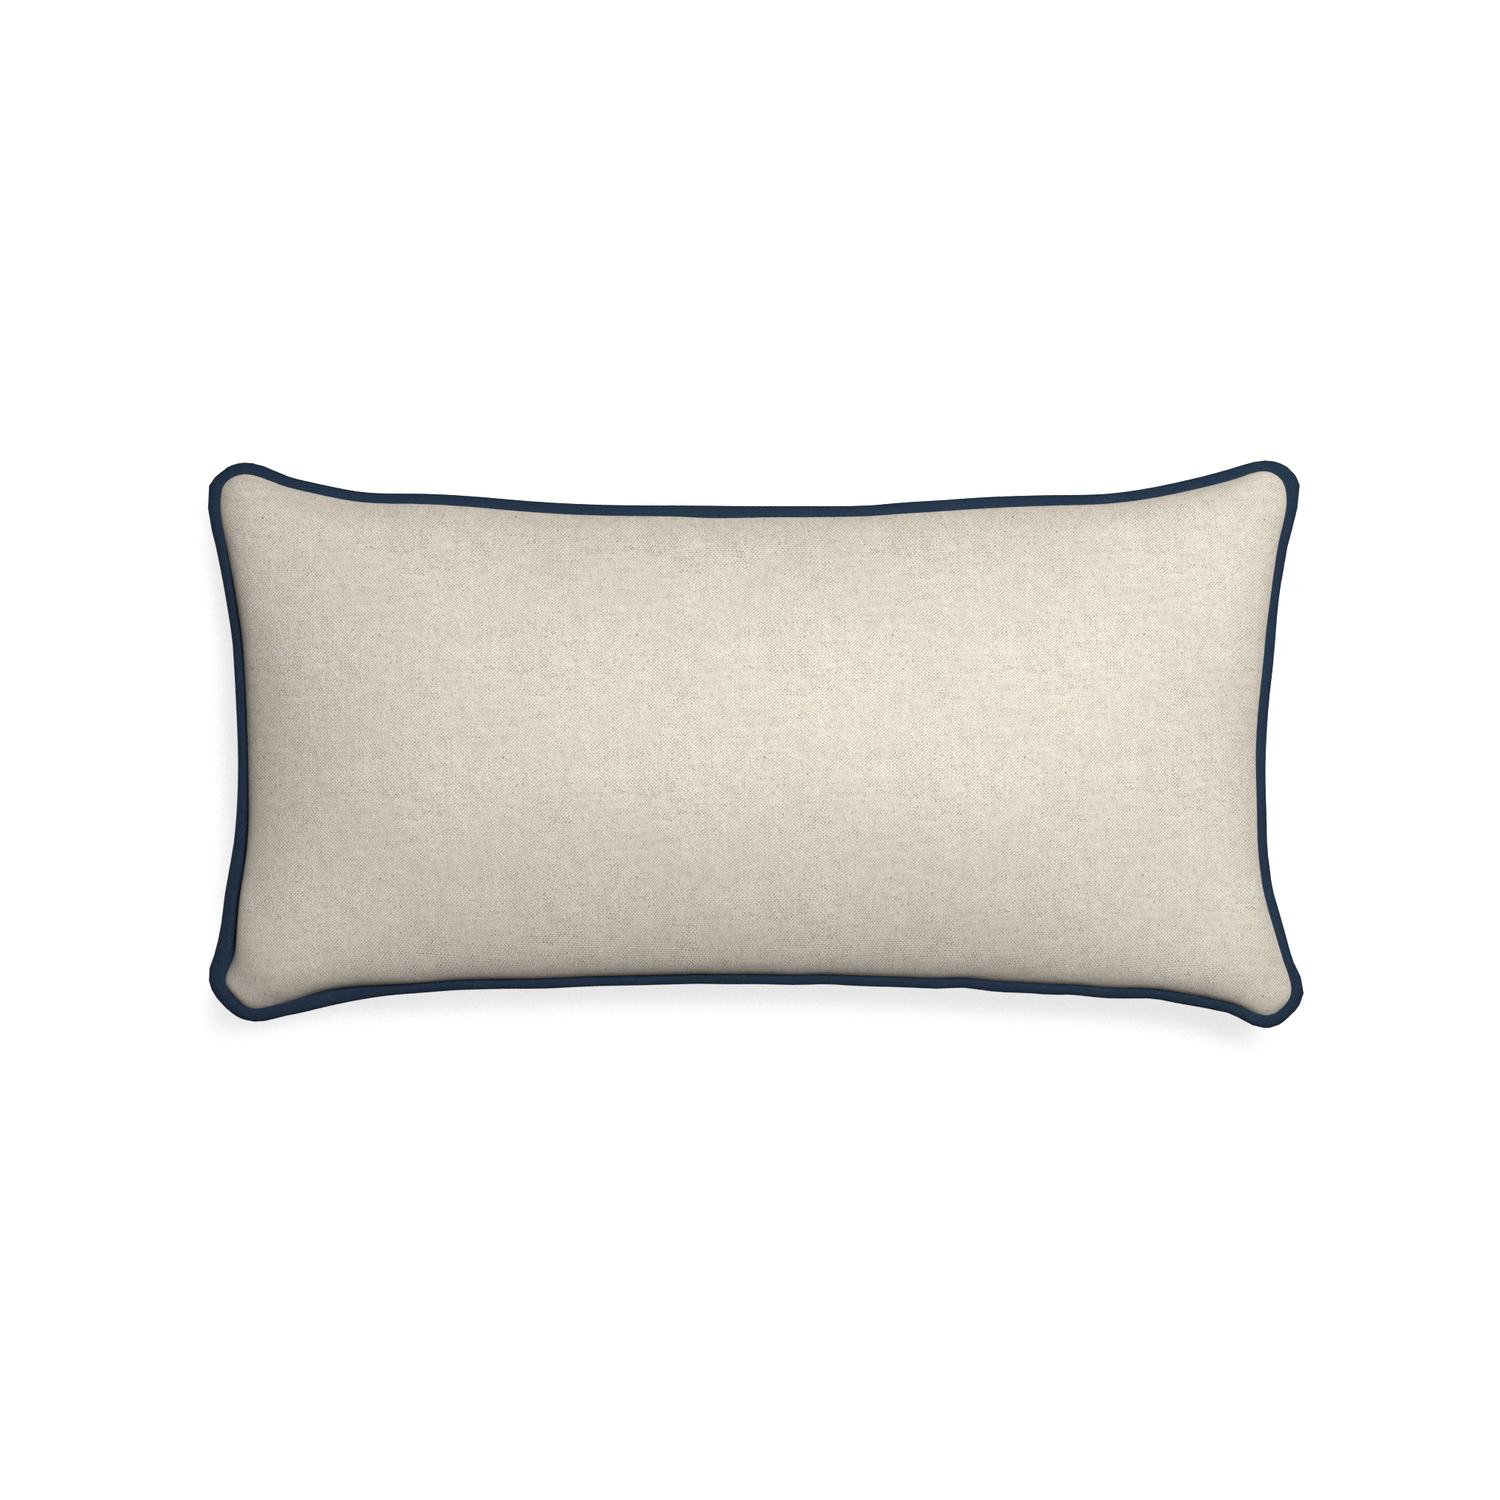 Midi-lumbar oat custom light brownpillow with c piping on white background